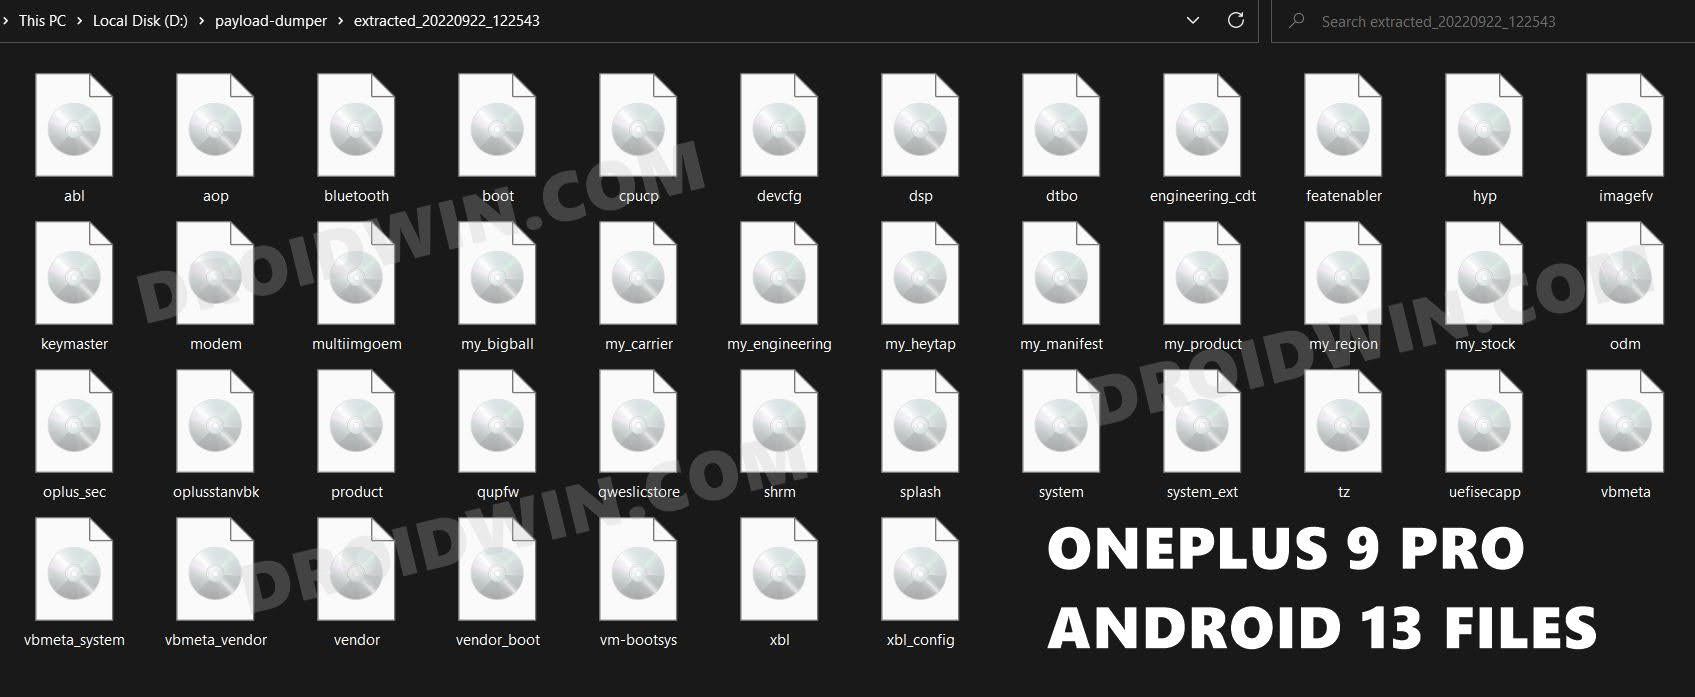 Install Android 13 on OnePlus 9 Pro via Fastboot Commands